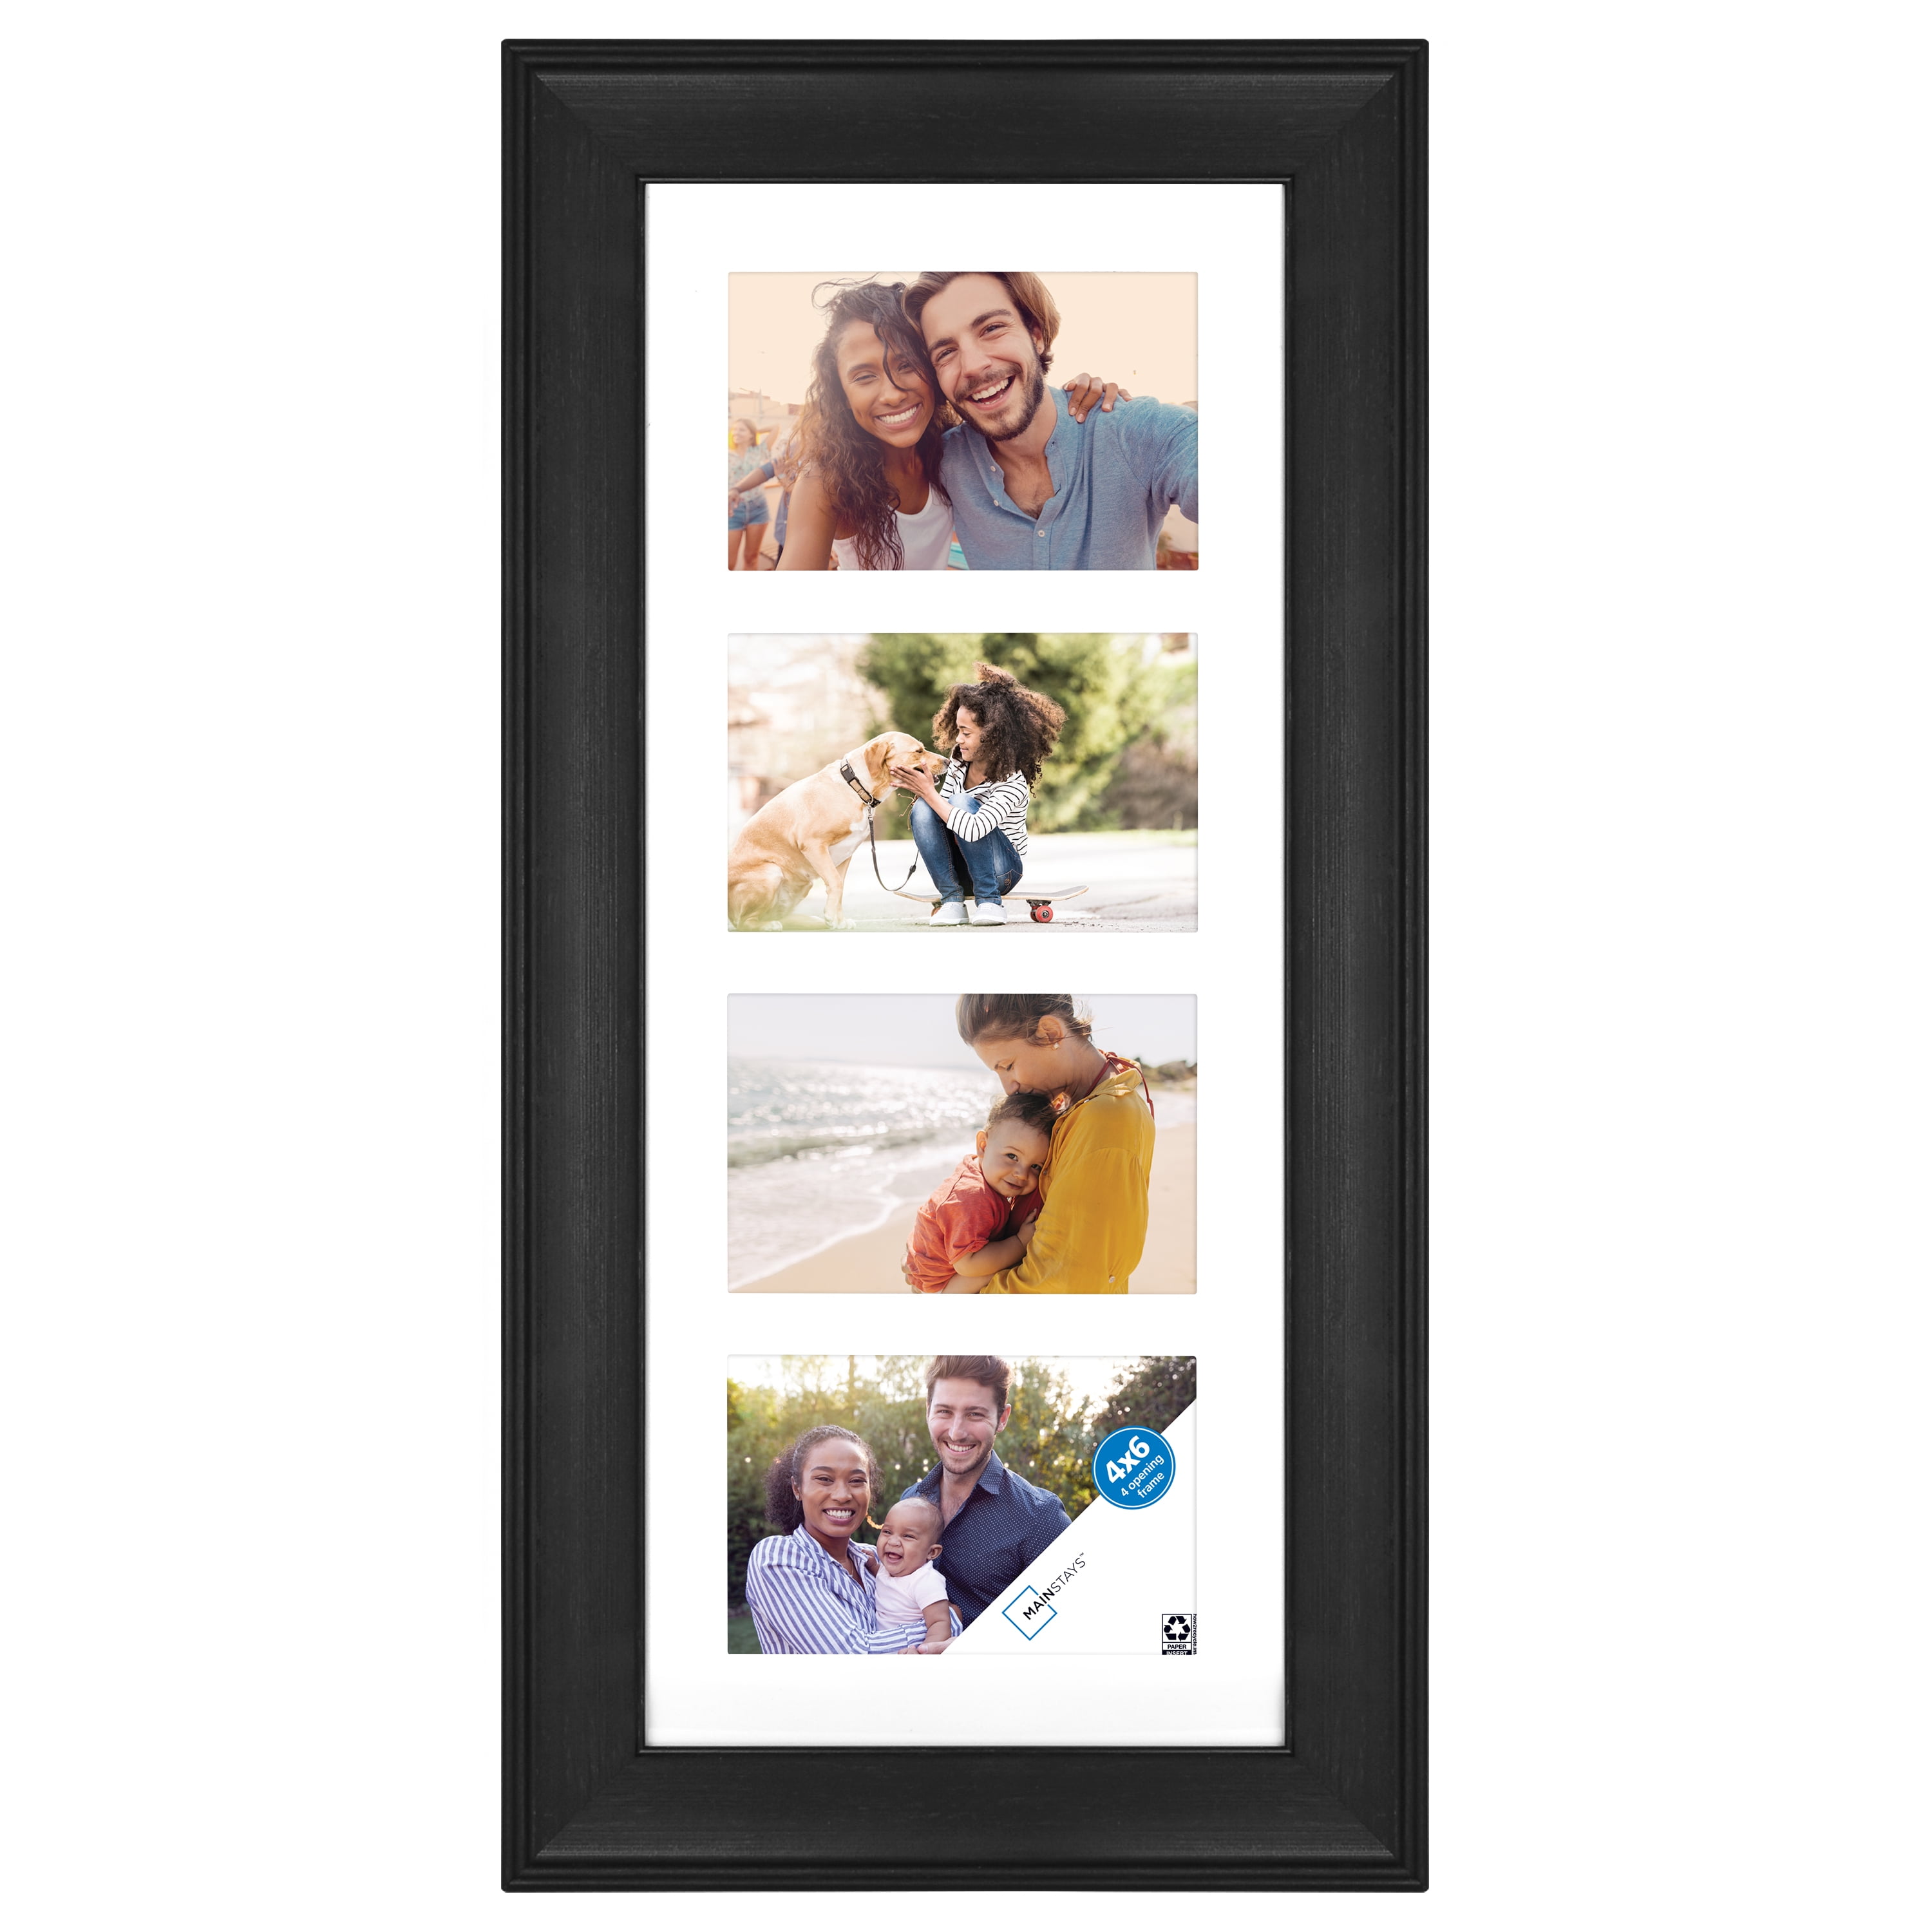 Details about   Wall Mounted White Wooden Frame 4x6 Triple Peg Collage Photo Picture Frame 